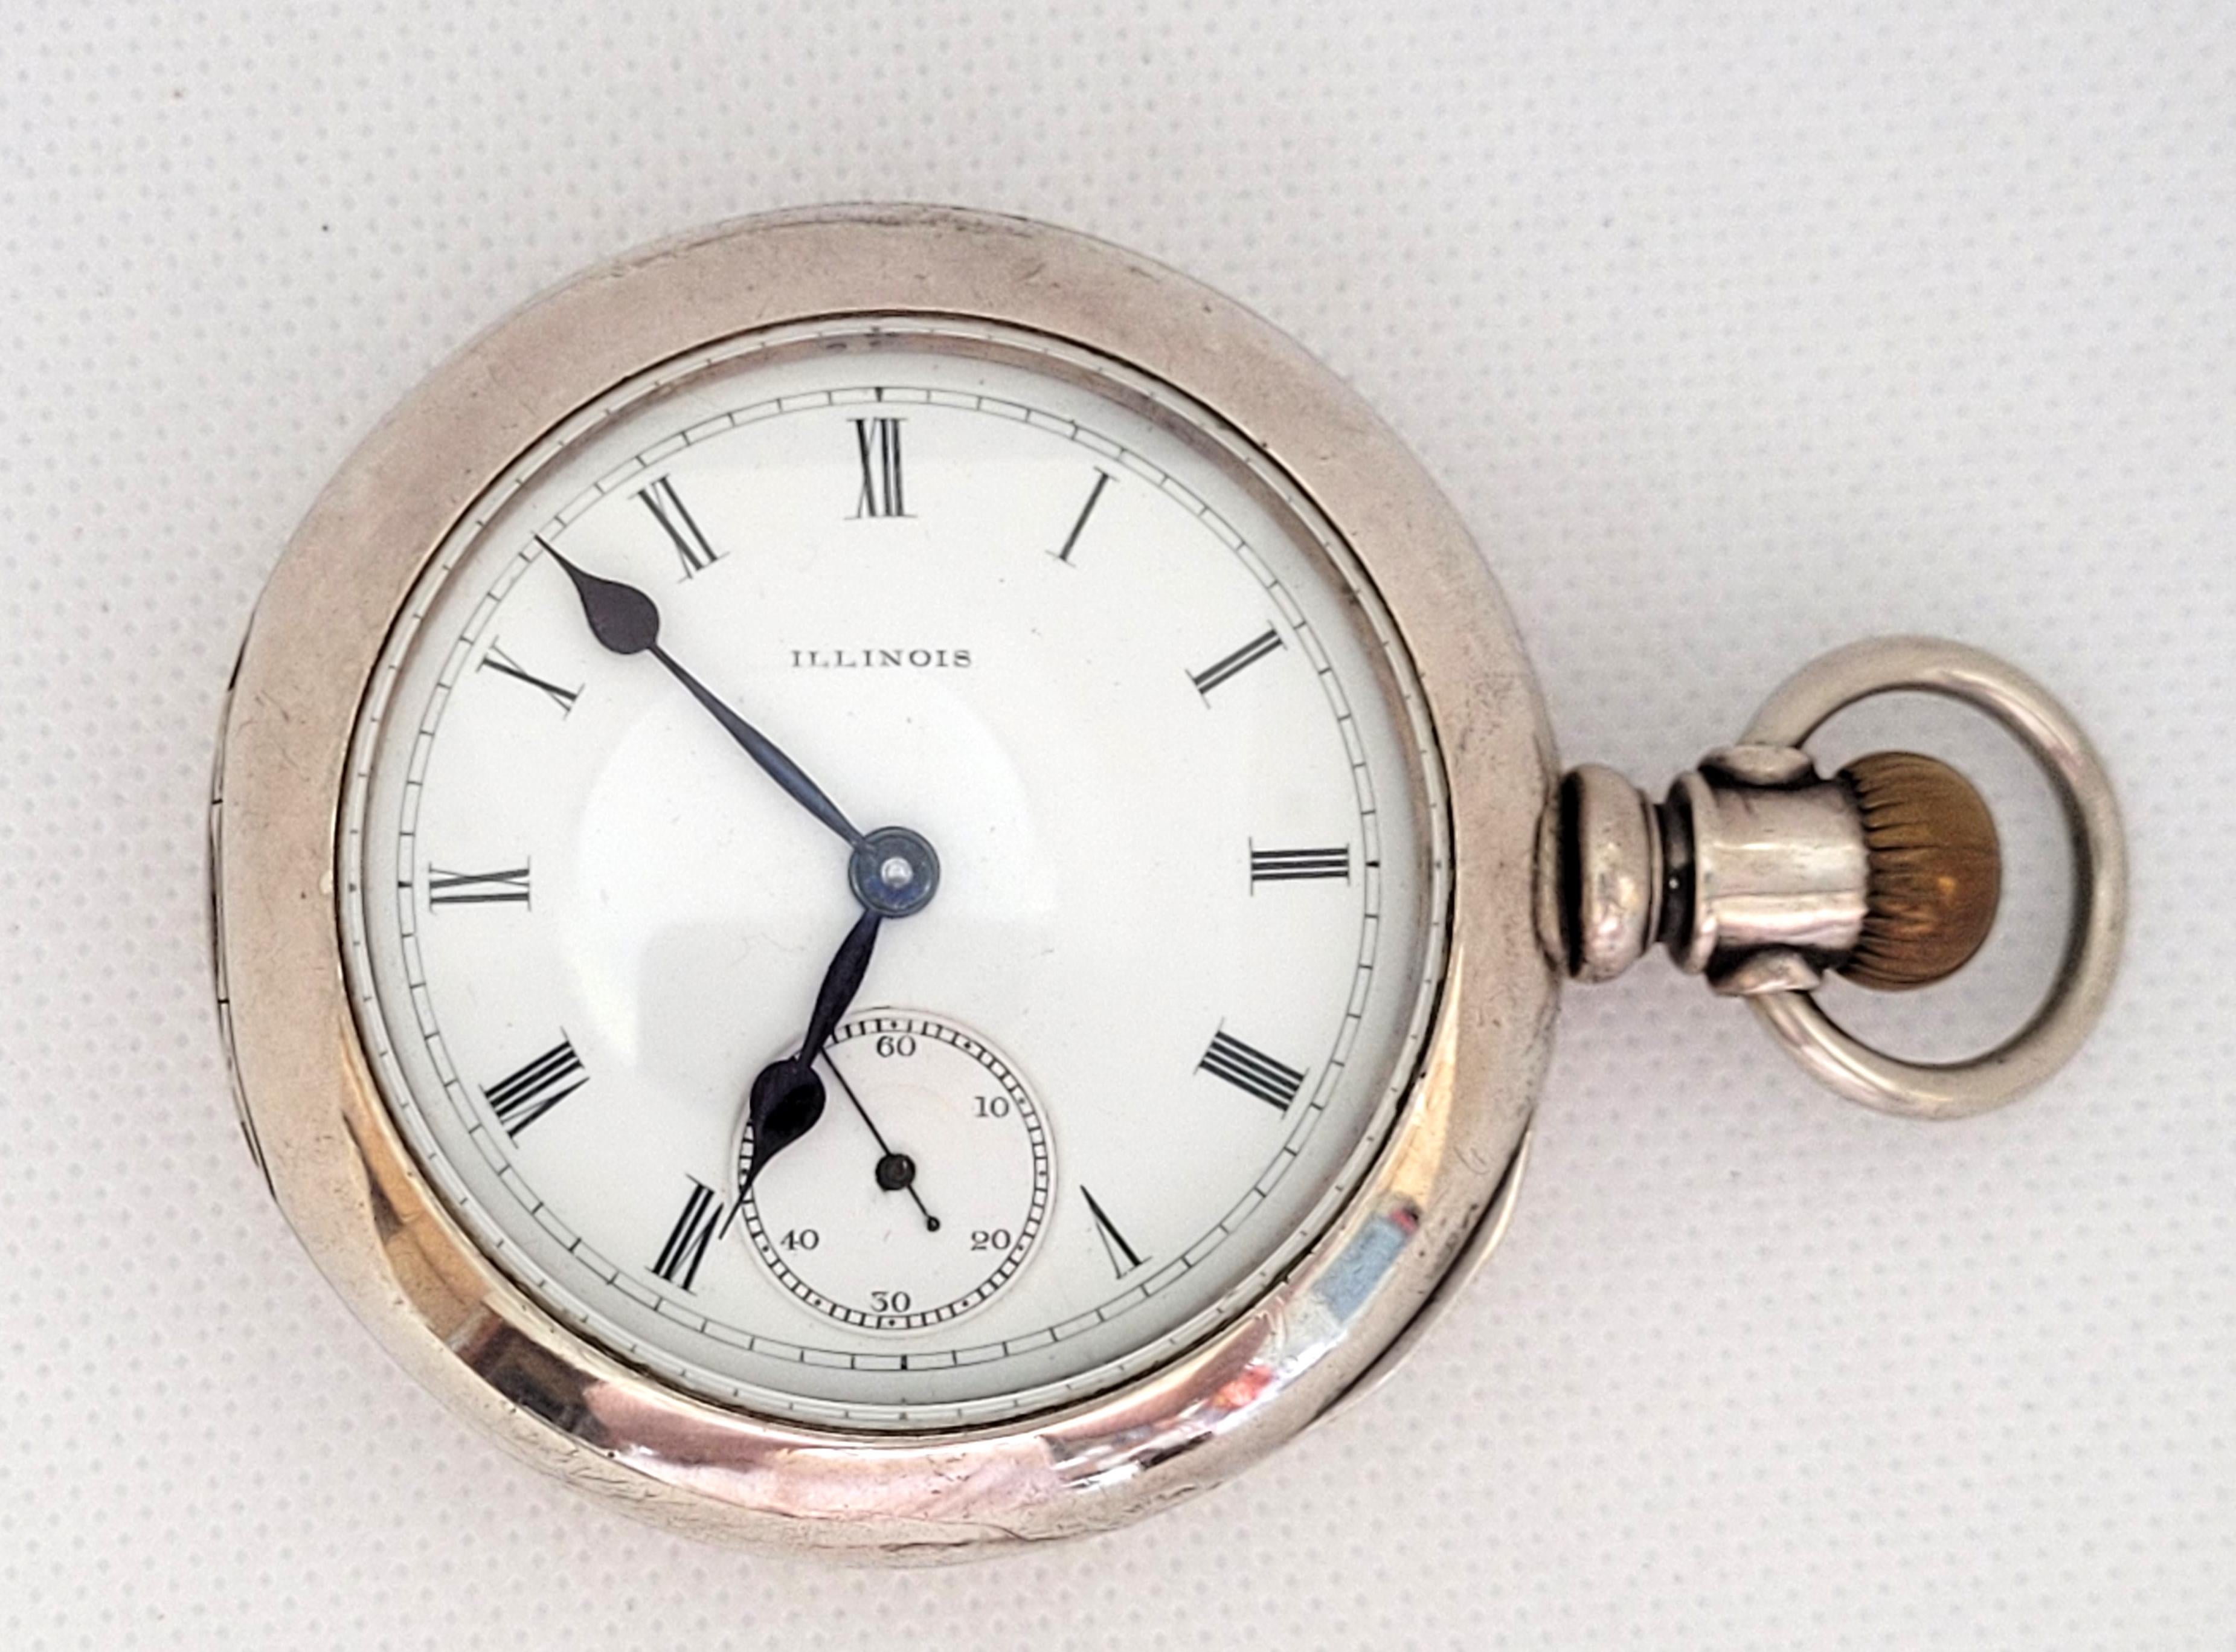 Heavy 1886 Ilinois watch with a 58mm silver color case (18s size) that has a thick clean glass crystal. There are slight dings on the case. The movement is 7 jewel, hunting, working, and serial number 964103. Overall this pocket watch is in very